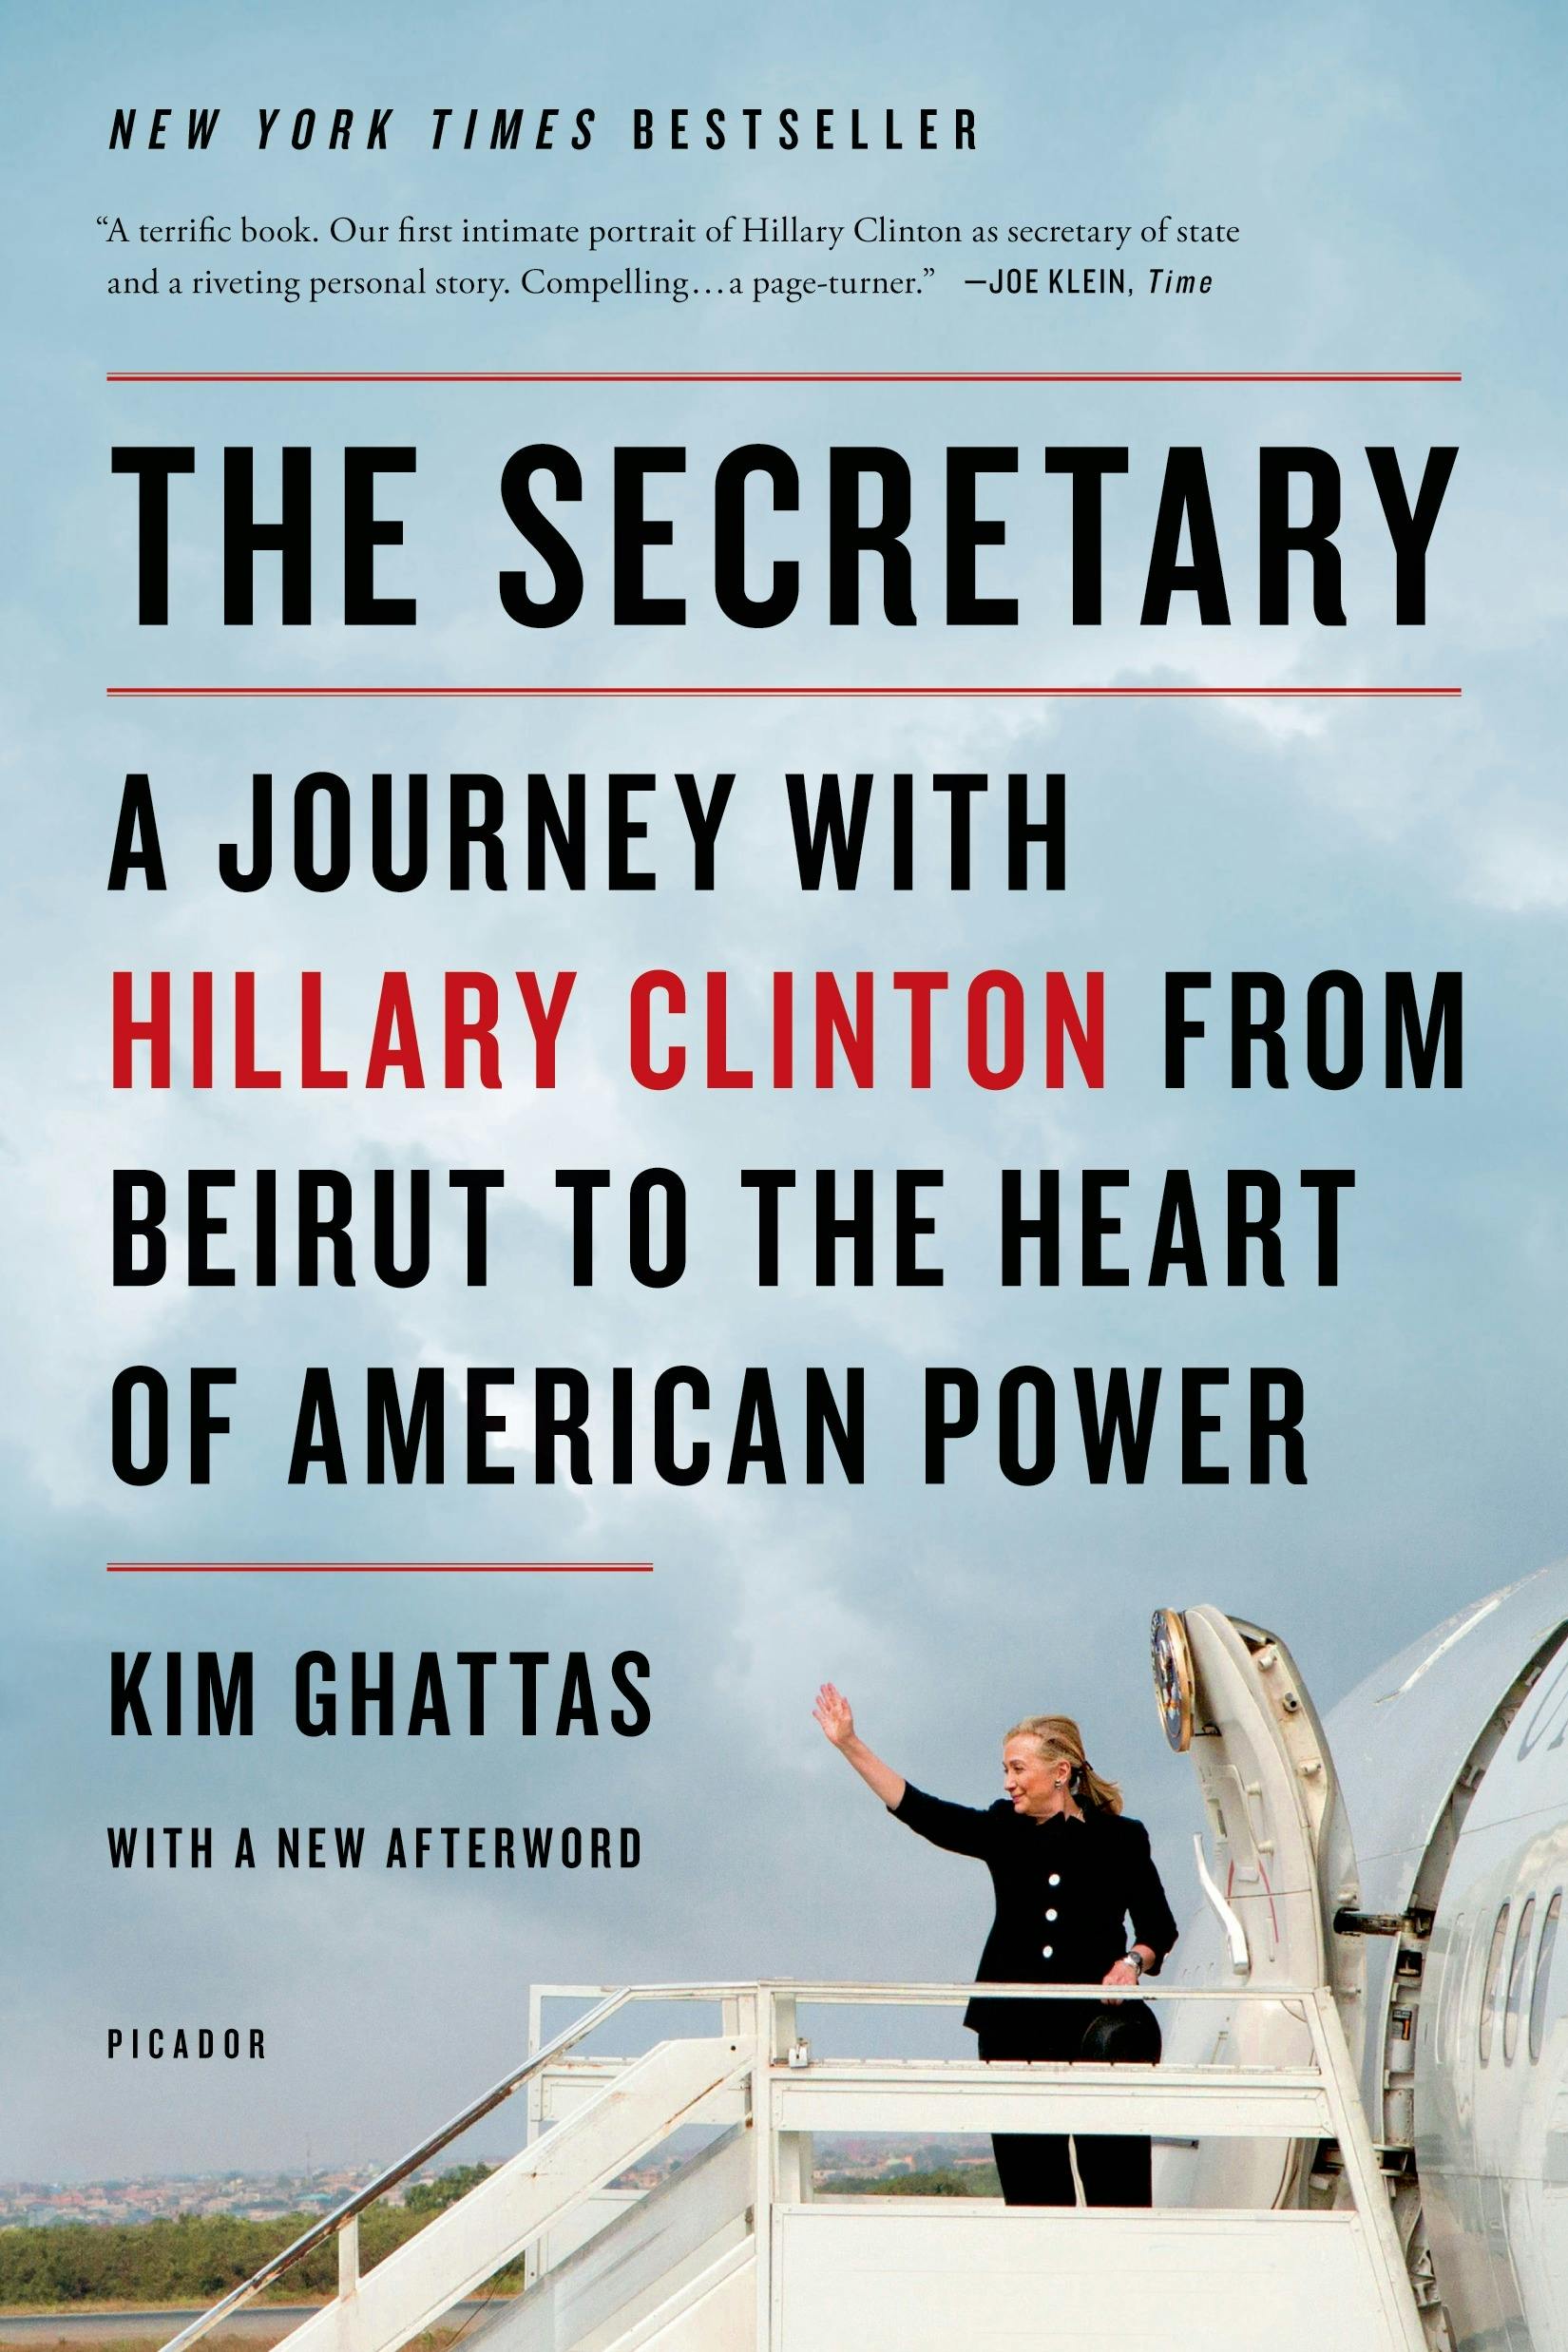 Hillary Rodham Clinton, Official Publisher Page